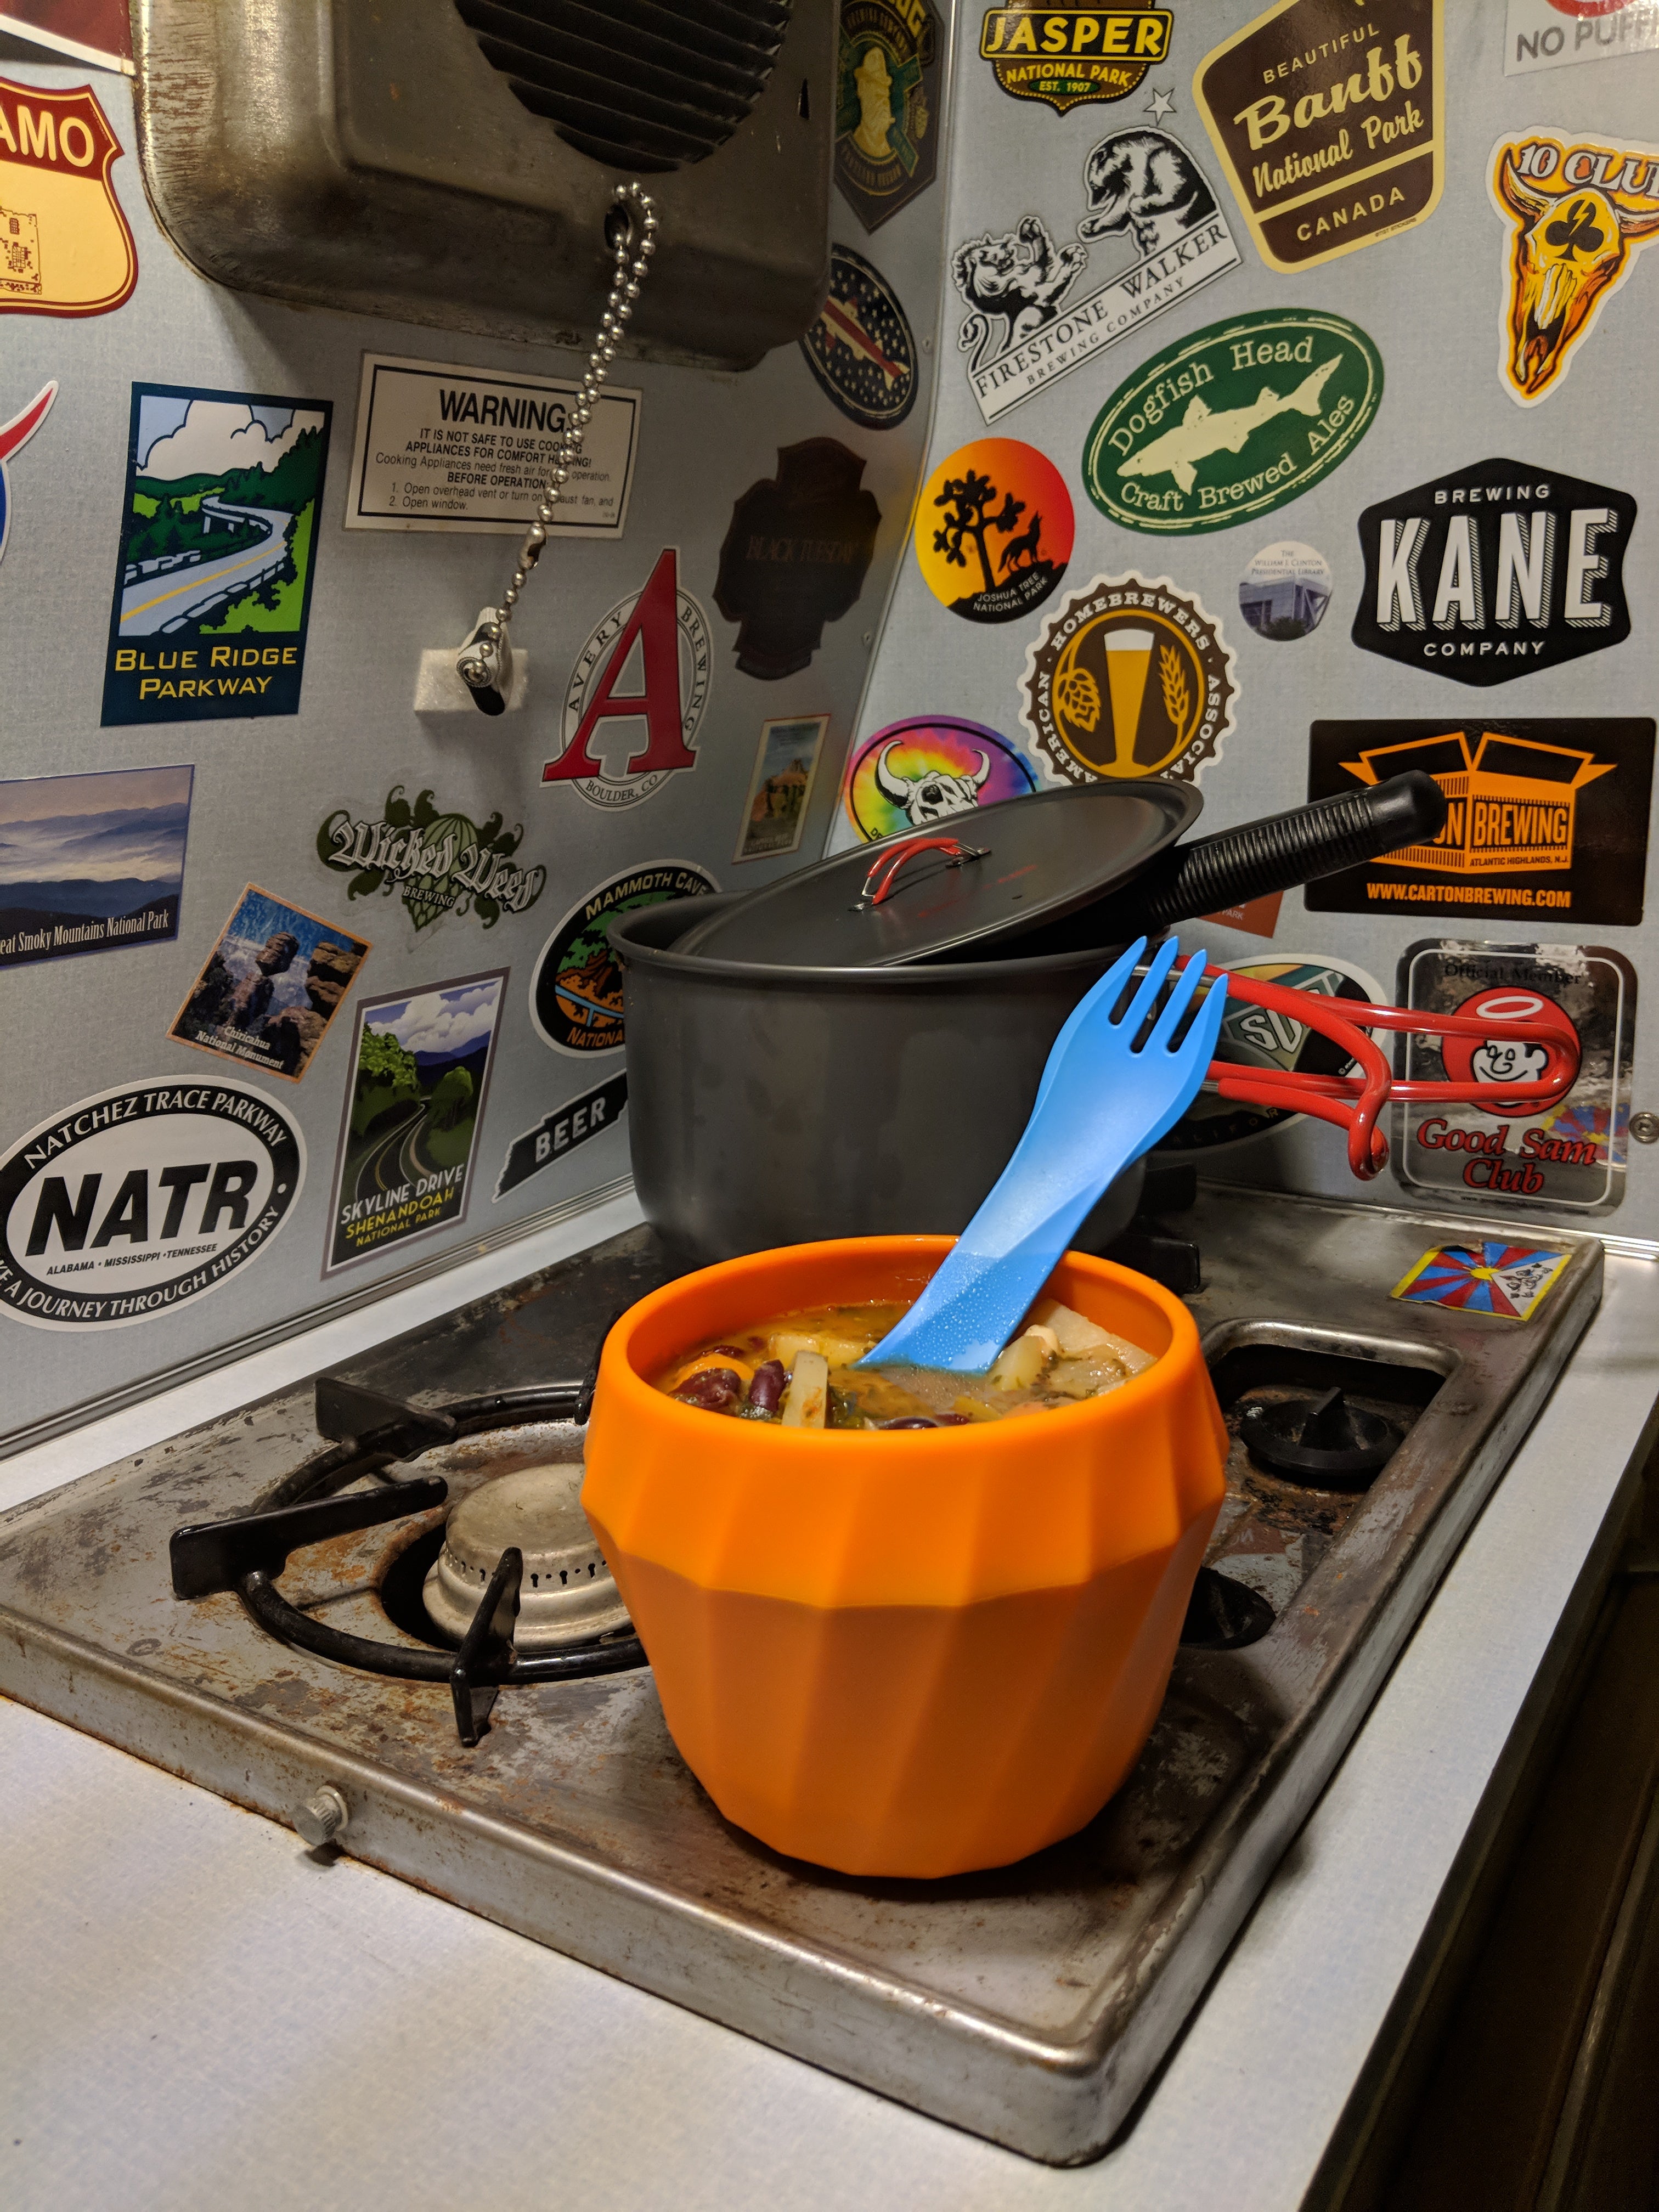 After heating up some soup in our campervan, we're ready to head out to the campfire for dinner (featuring our humangear FlexiBowl and GoBites utensil). 